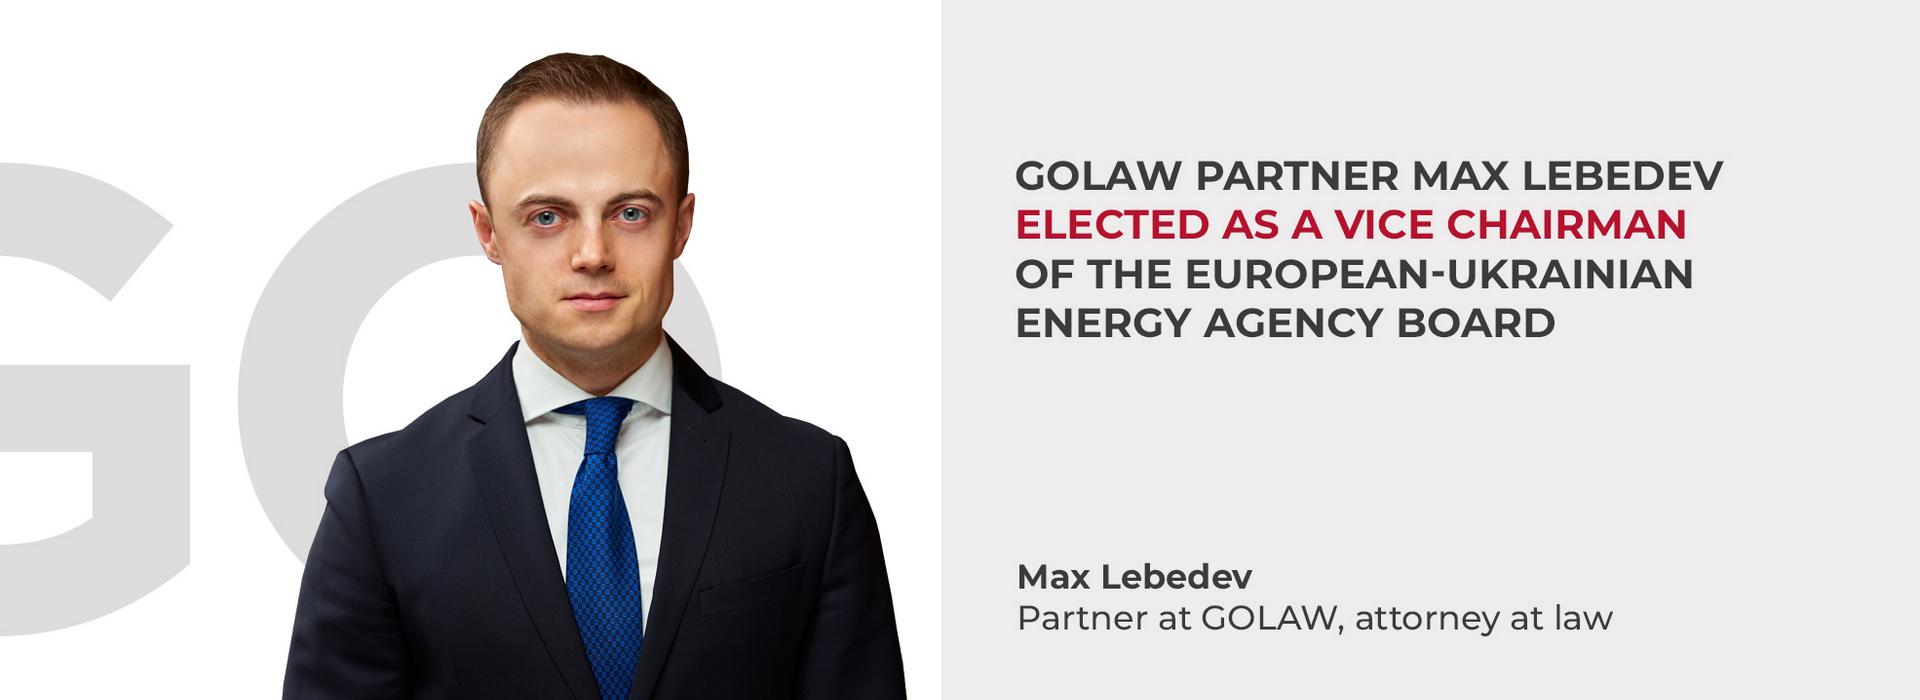 GOLAW Partner Max Lebedev elected as a Vice Chairman of the European-Ukrainian Energy Agency Board